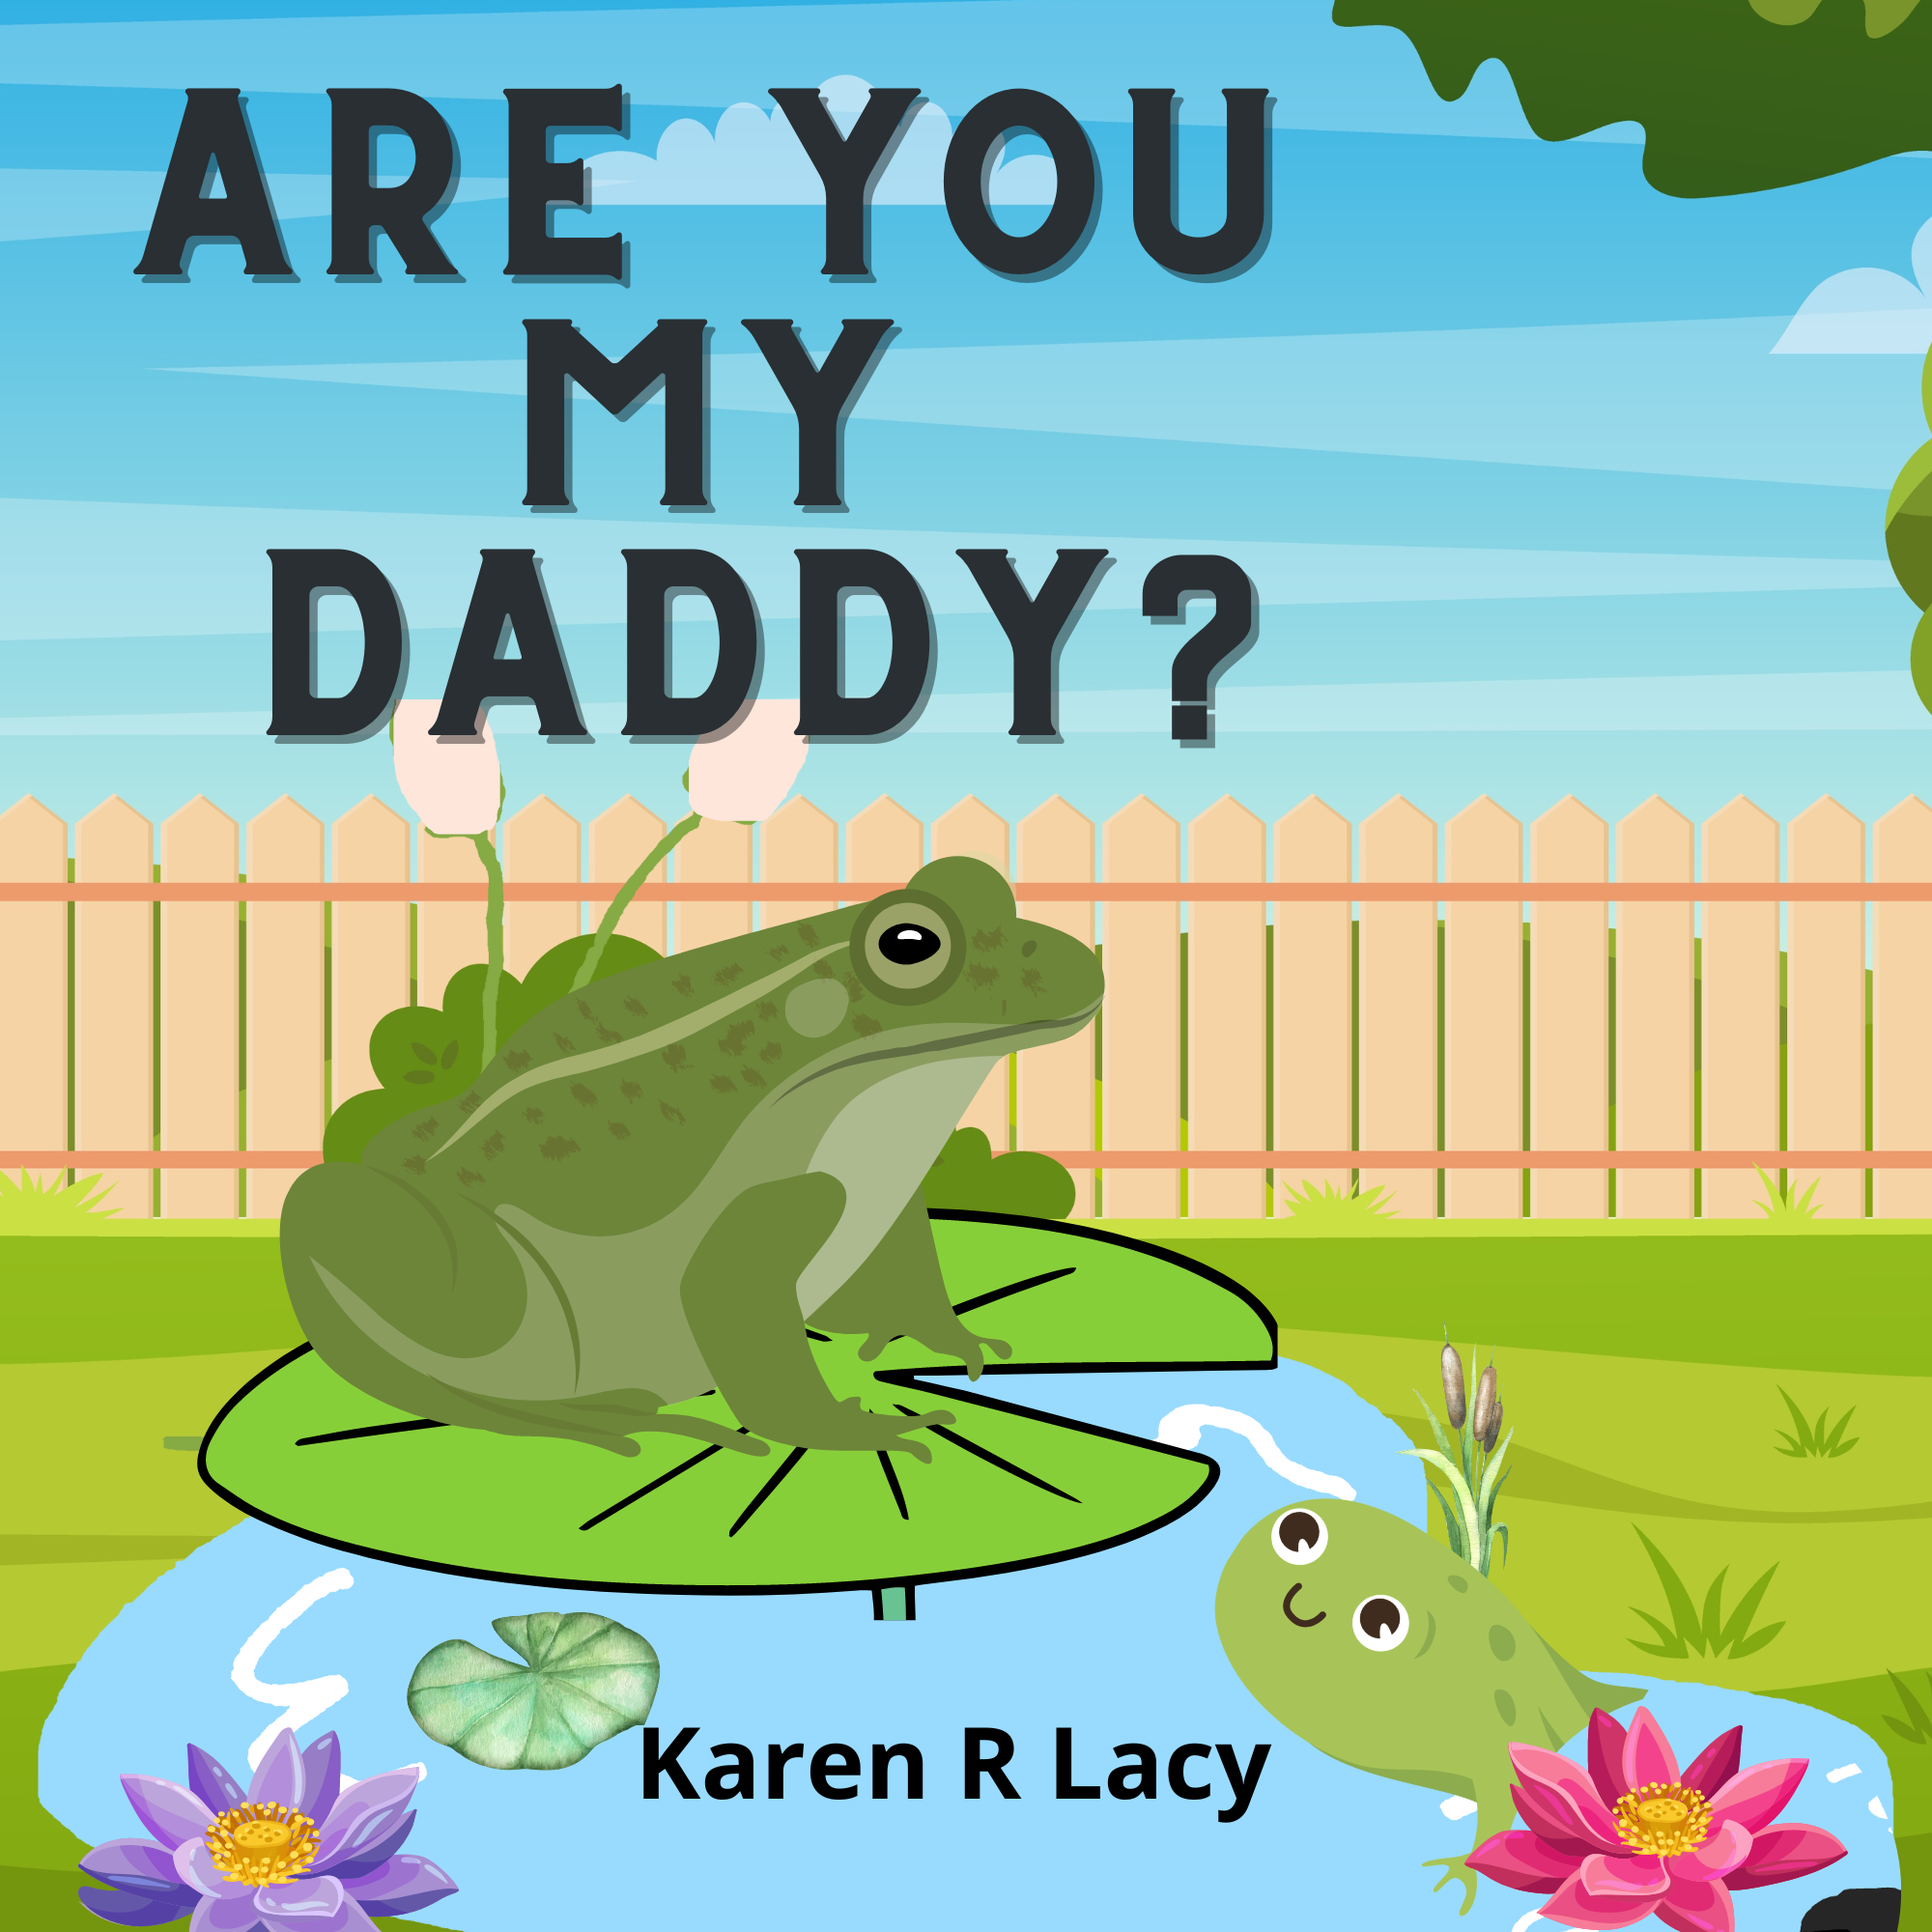 Are you my Daddy?